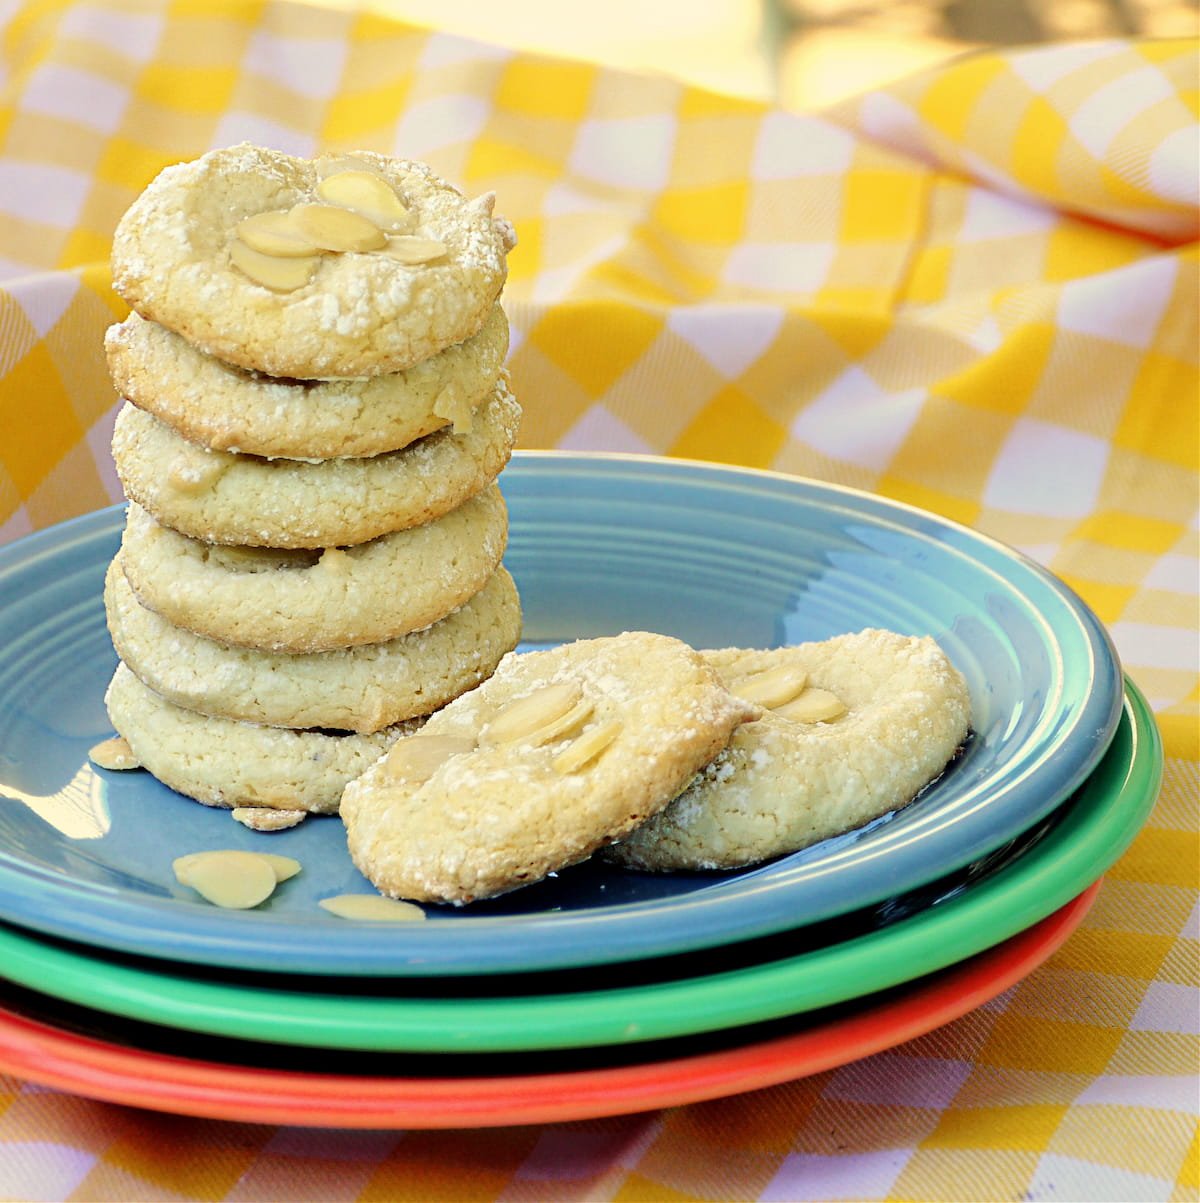 Small plate with a stack of six cookies, plus two cookies on the side.